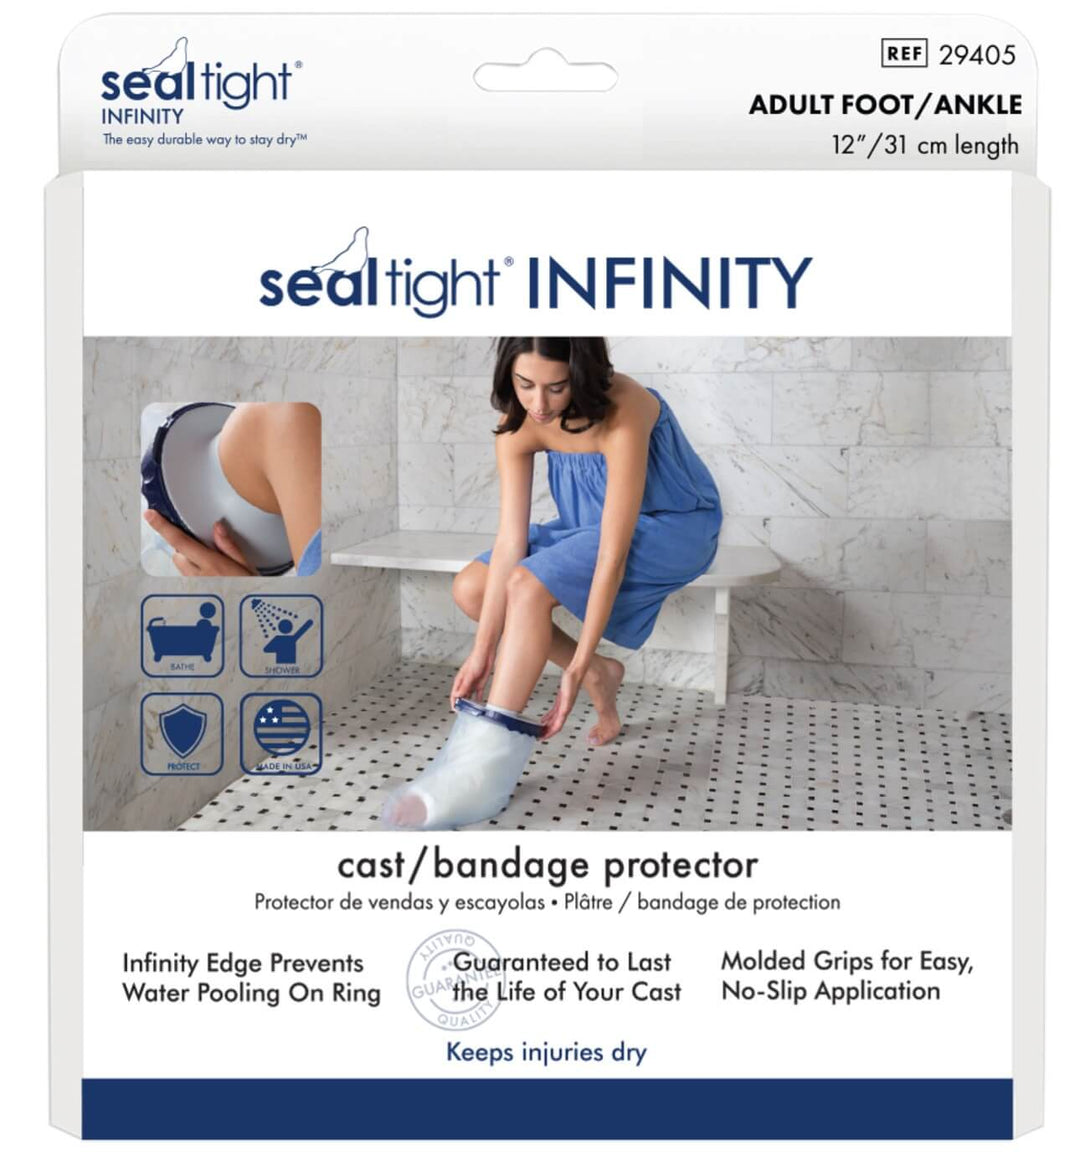 seal tight infinity adult foot ankle